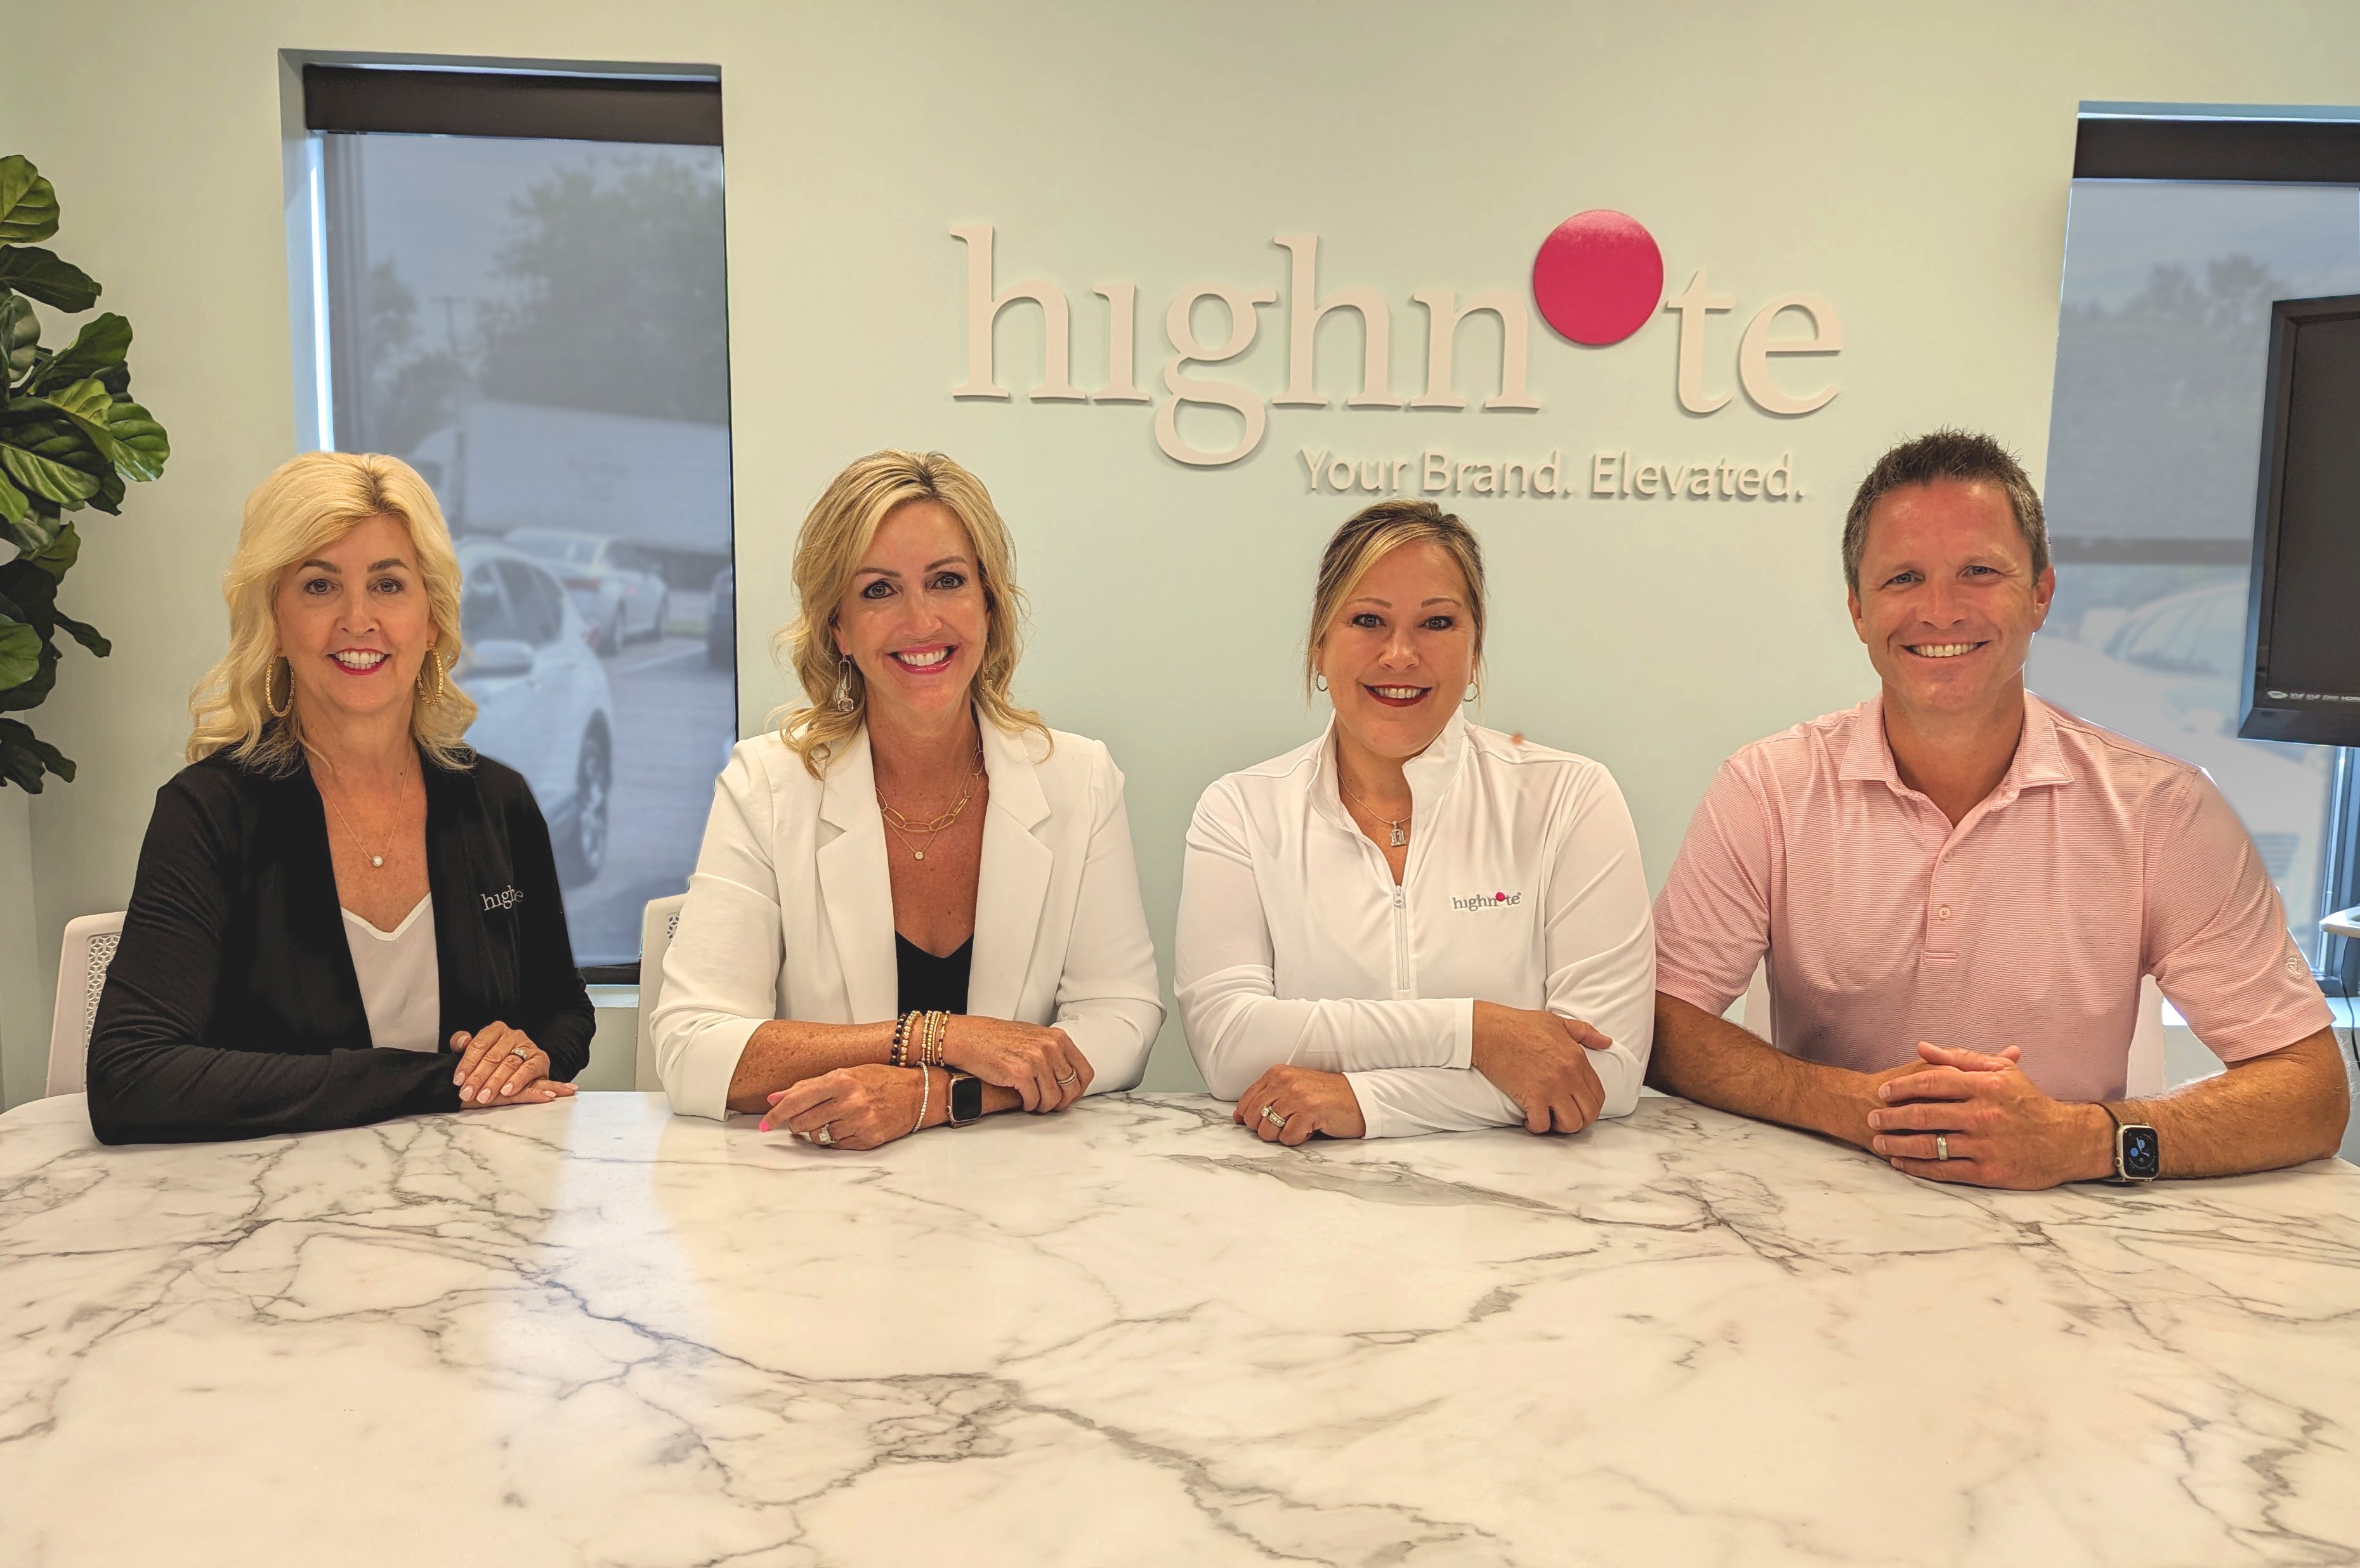 The Marek Group Acquires Direct Marketing Services Company, HighNote